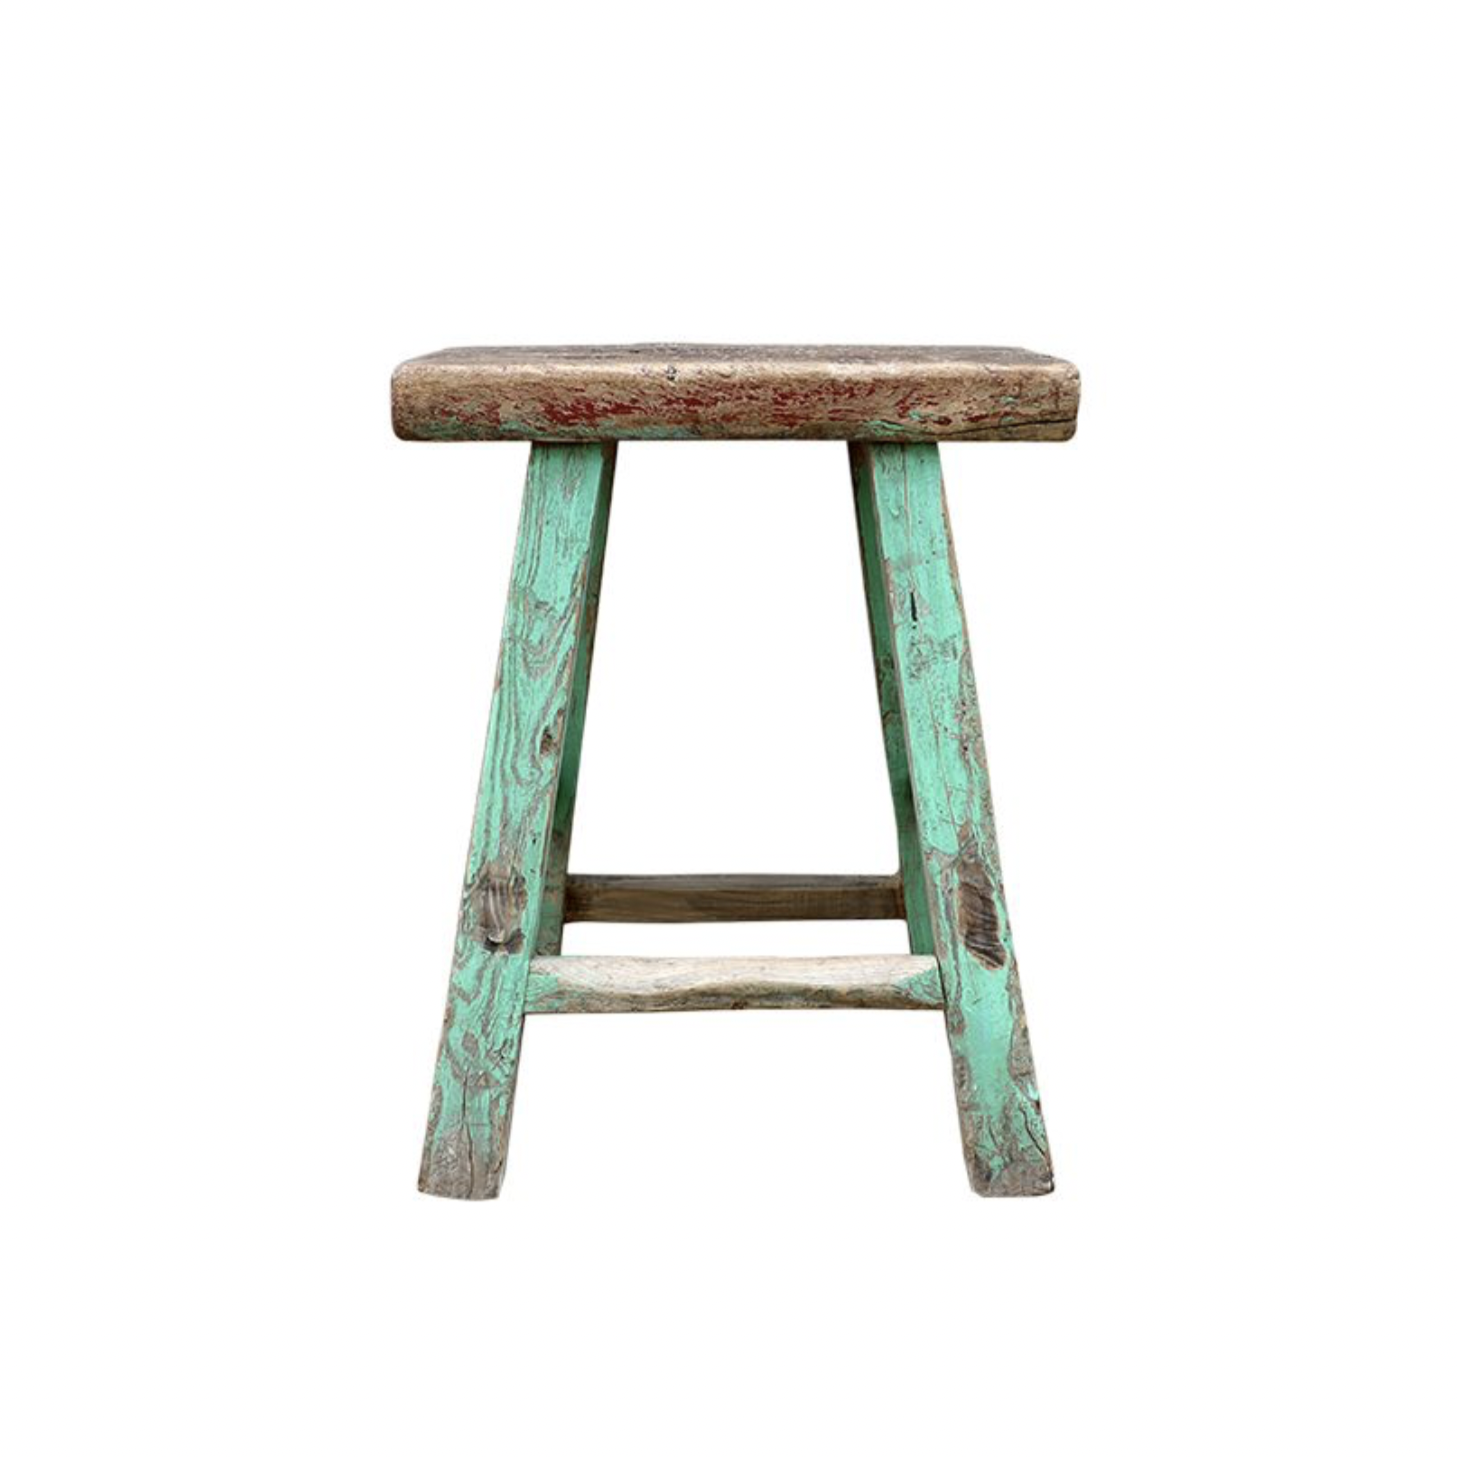 Antique Stool in Faded Green, 16" x 9" x 21"